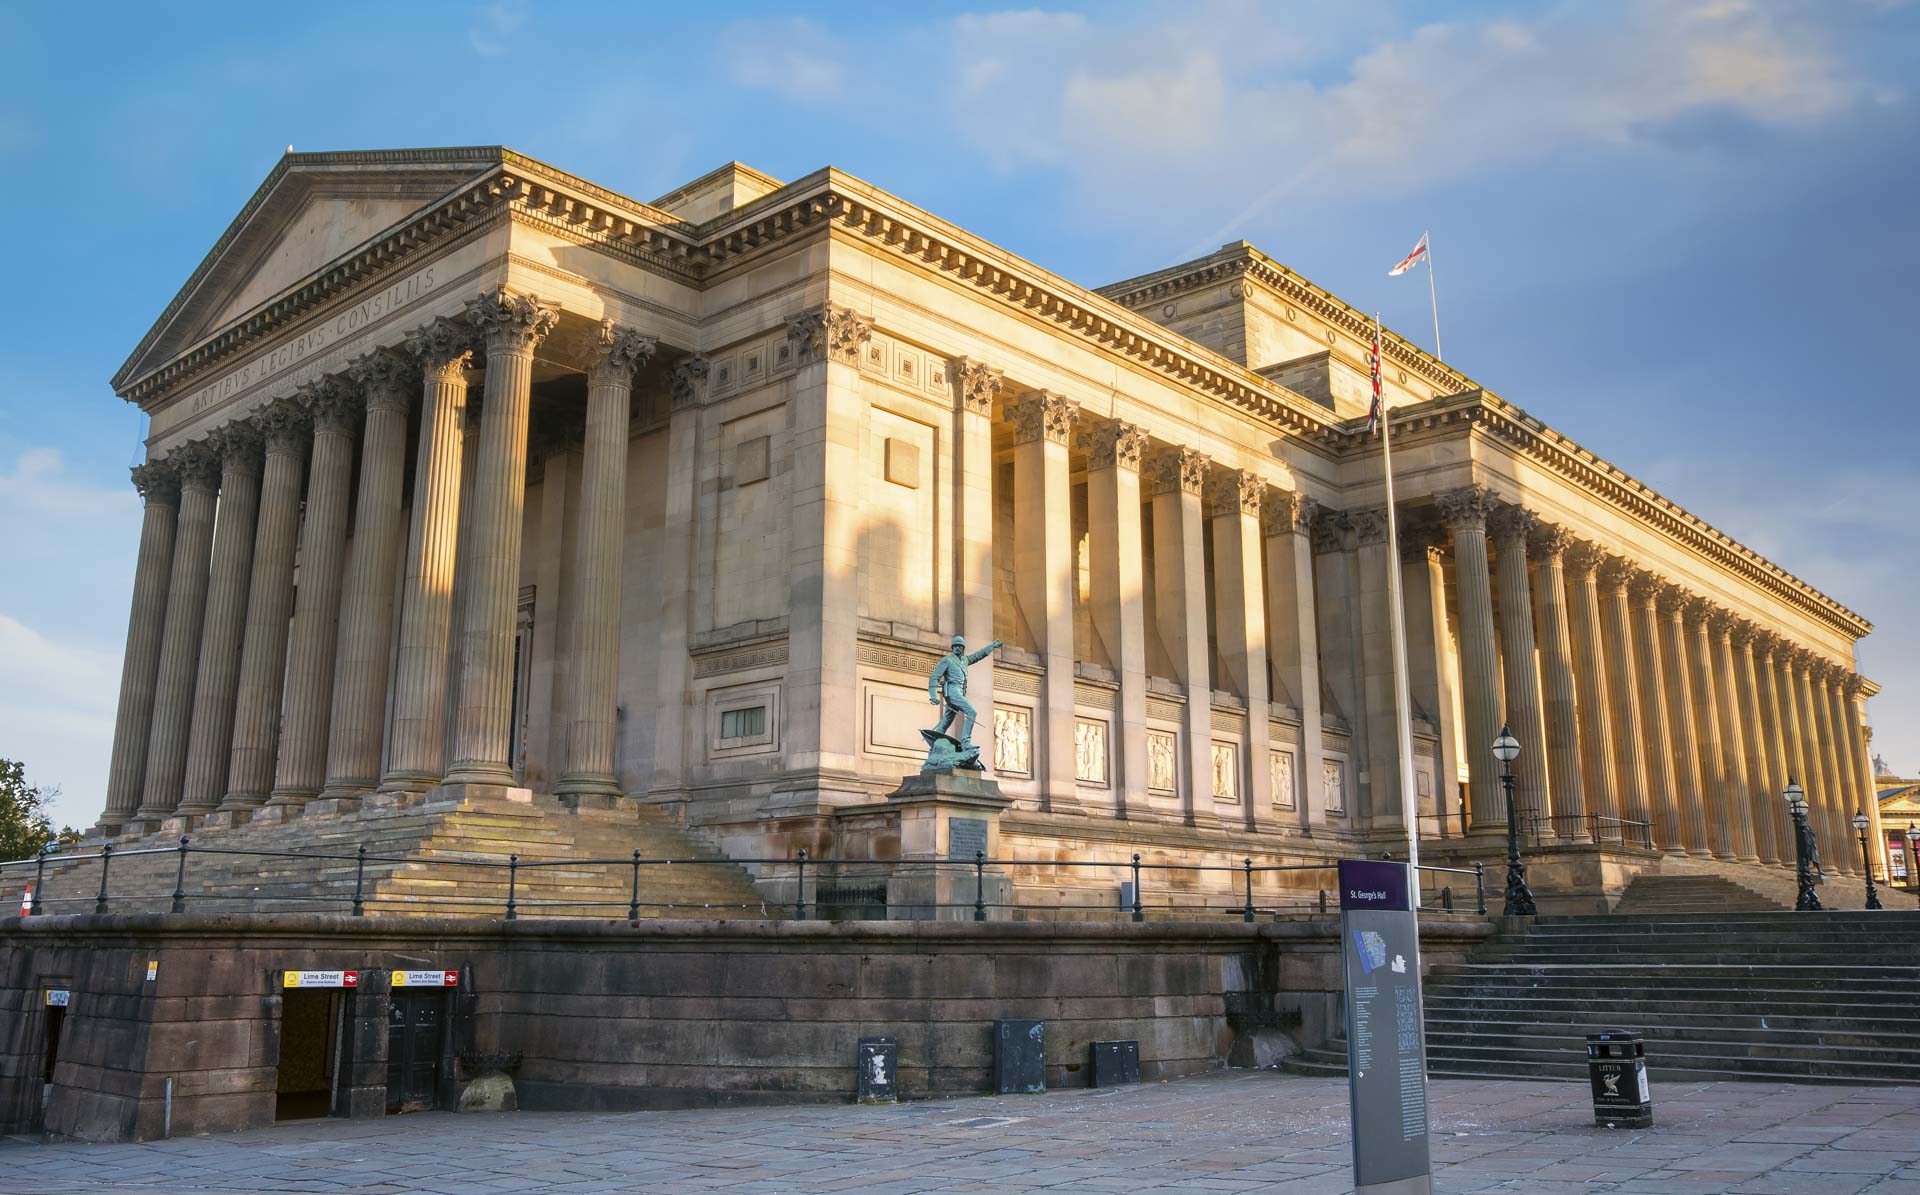 Liverpool, UK - May 17 2018: St George's Hall designed by Harvey Lonsdale Elmes, contains concert halls and law courts, opened in 1854 and it's on the list of National Heritage List for England